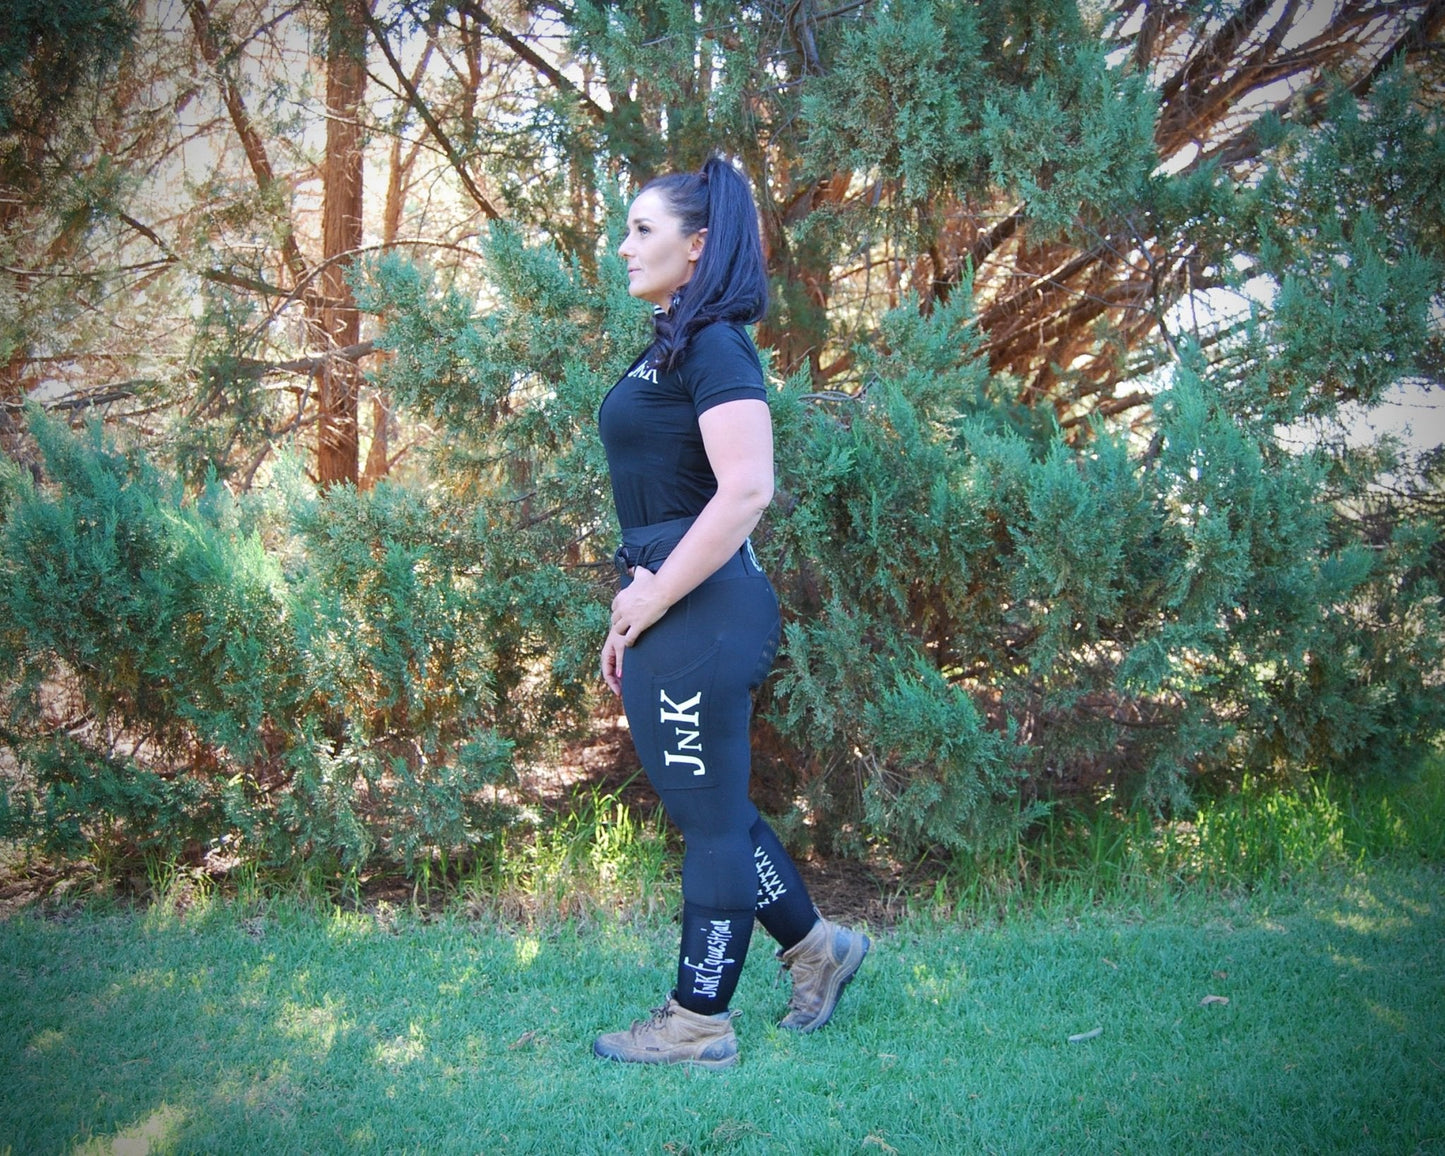 Woman standing in park wearing black horse riding tights and boots.